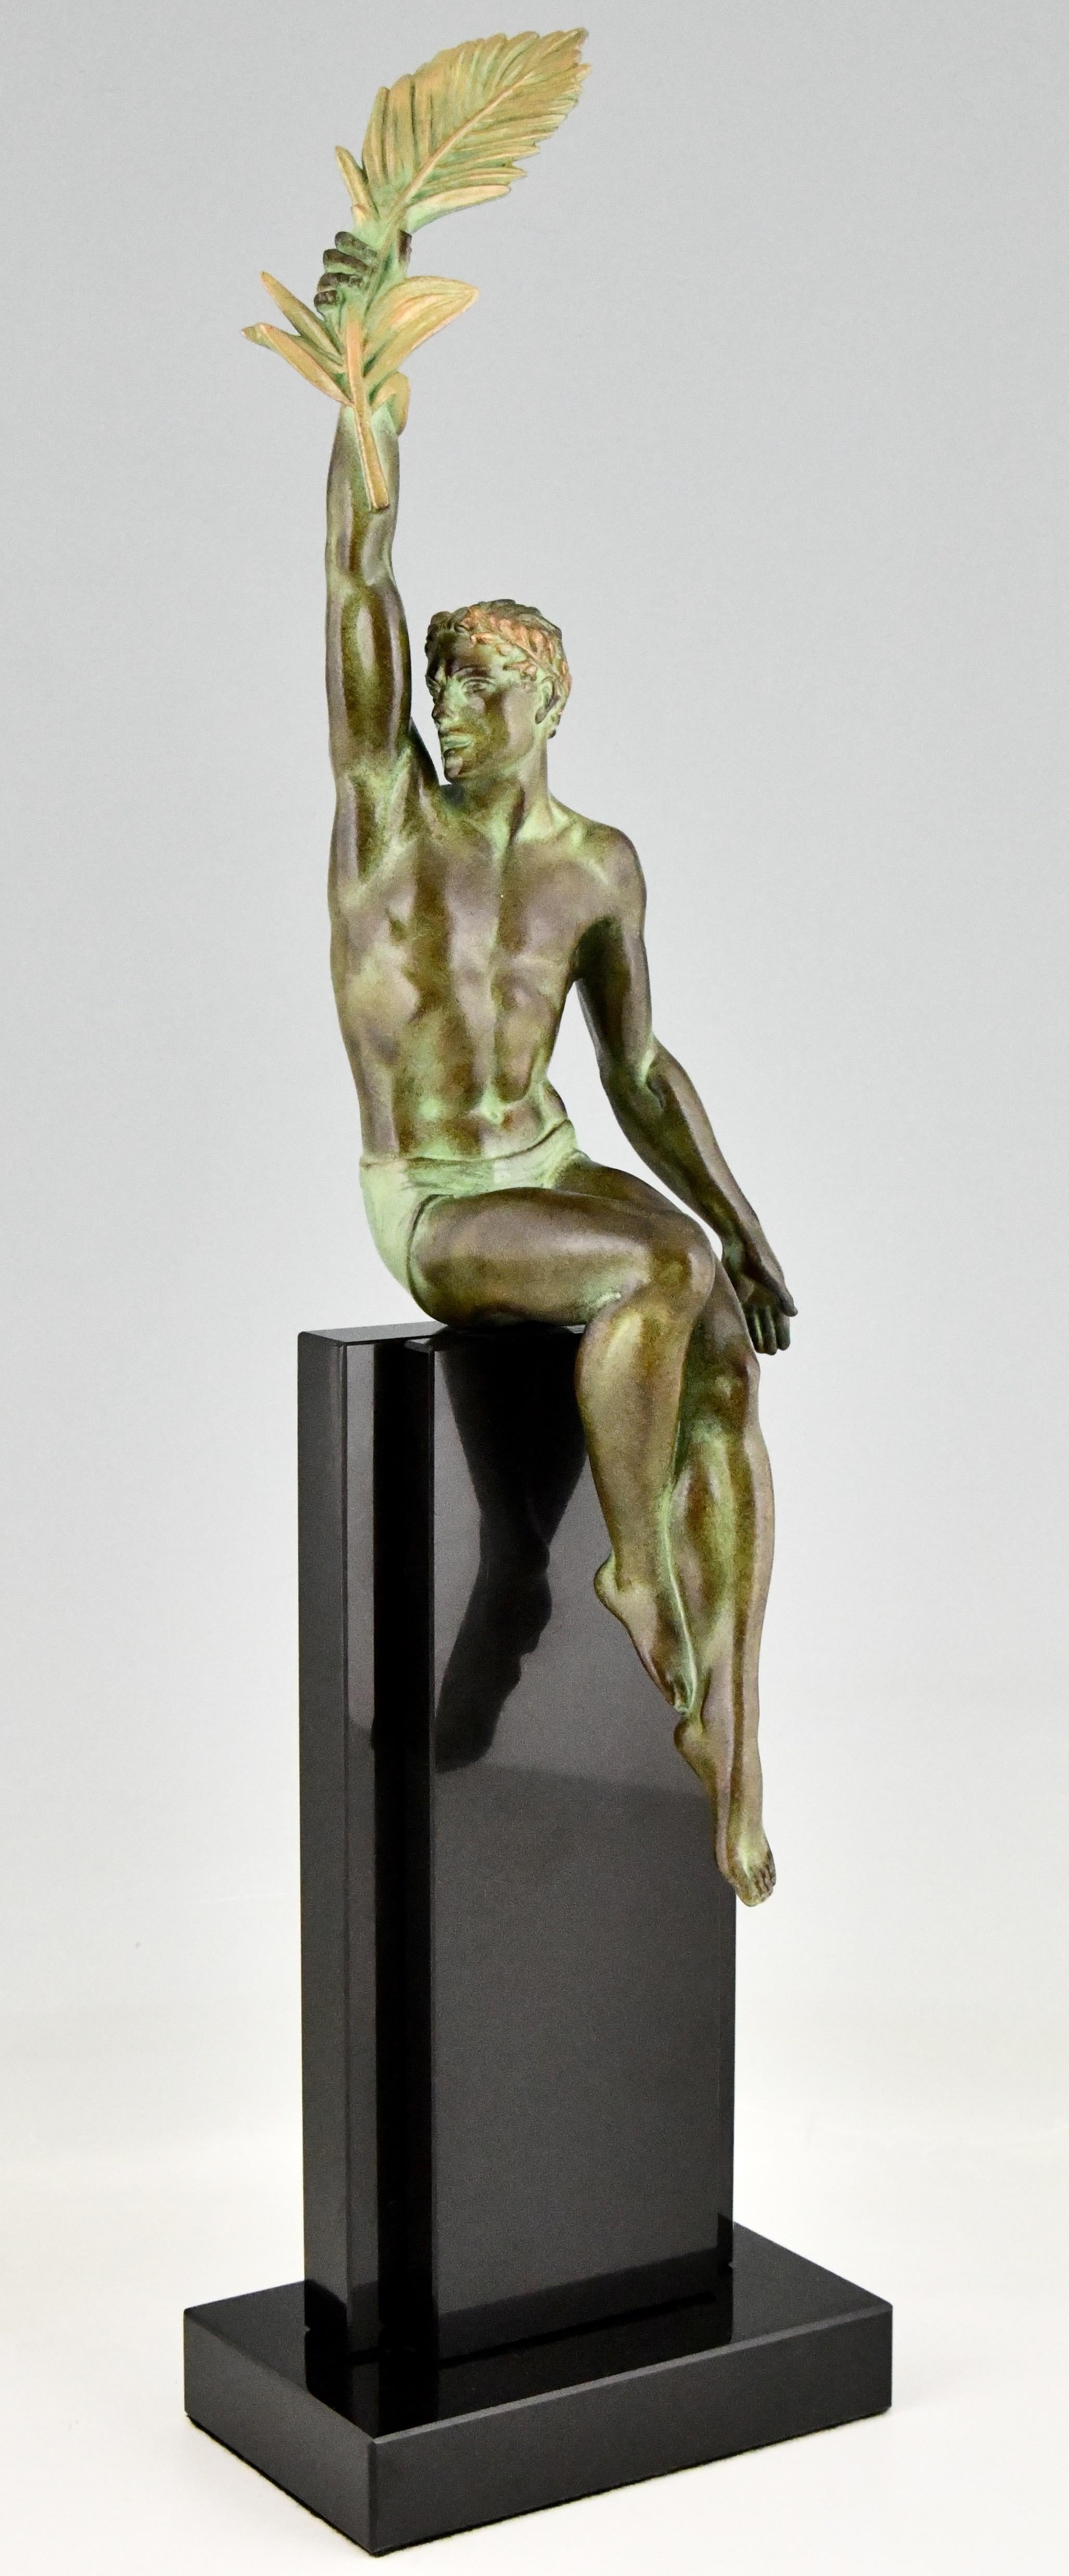 Victory, Art Deco sculpture designed by Pierre Le Faguays ca. 1930. 
Seated man holding a palm leaf. 
Patinated Art metal on a black marble base. 
Contemporary cast at the Max Le Verrier foundry in Paris. 
With foundry seal.